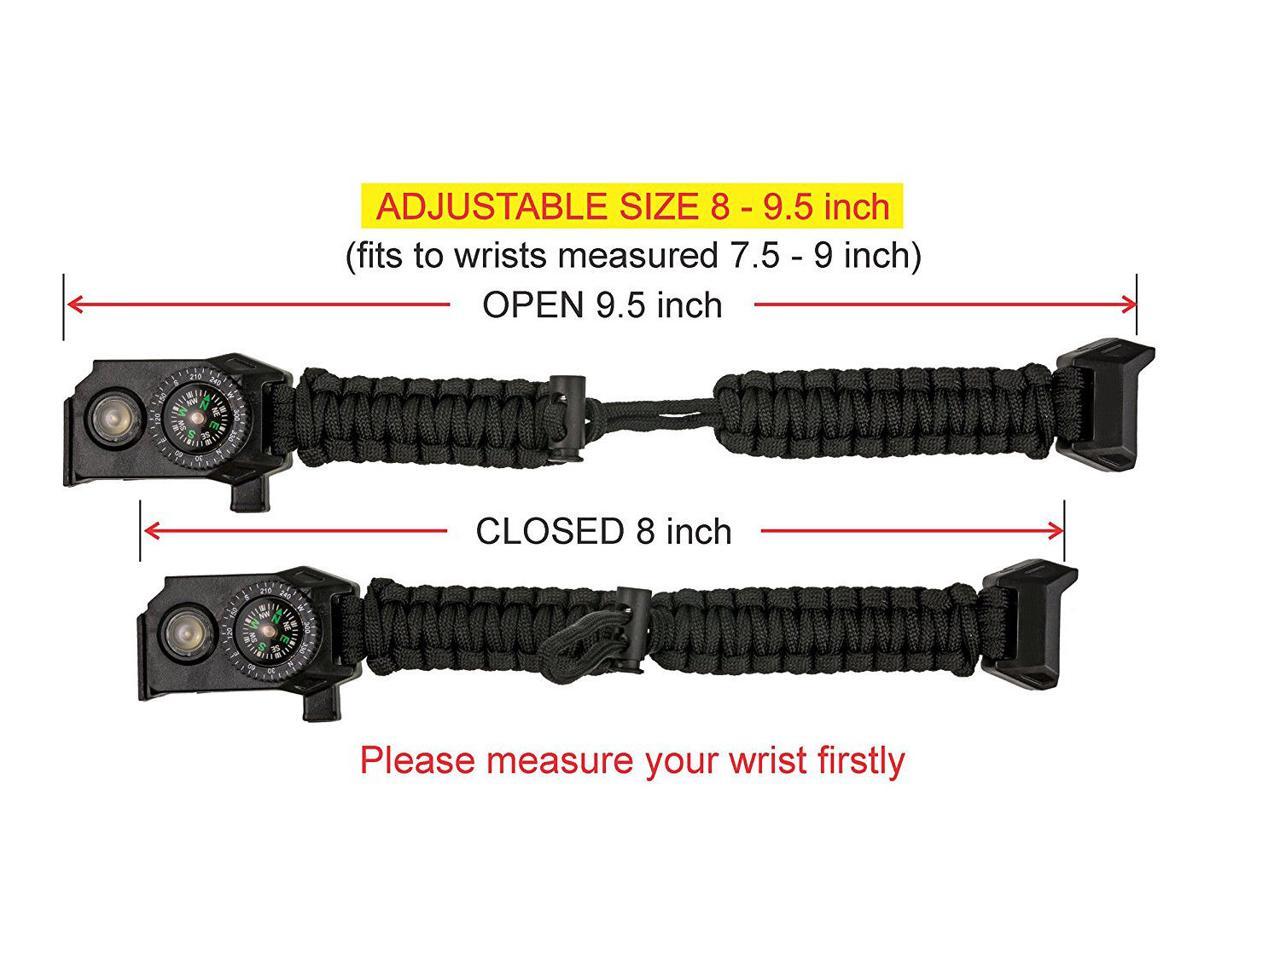 Rescue Whistl Number-one 2 Pcs Survival Bracelet 21 in 1 Multifunction Waterproof Tactical Emergency Survival Gear Wristband with LED SOS Light Fire Starter for Hiking Camping Thermometer Compass